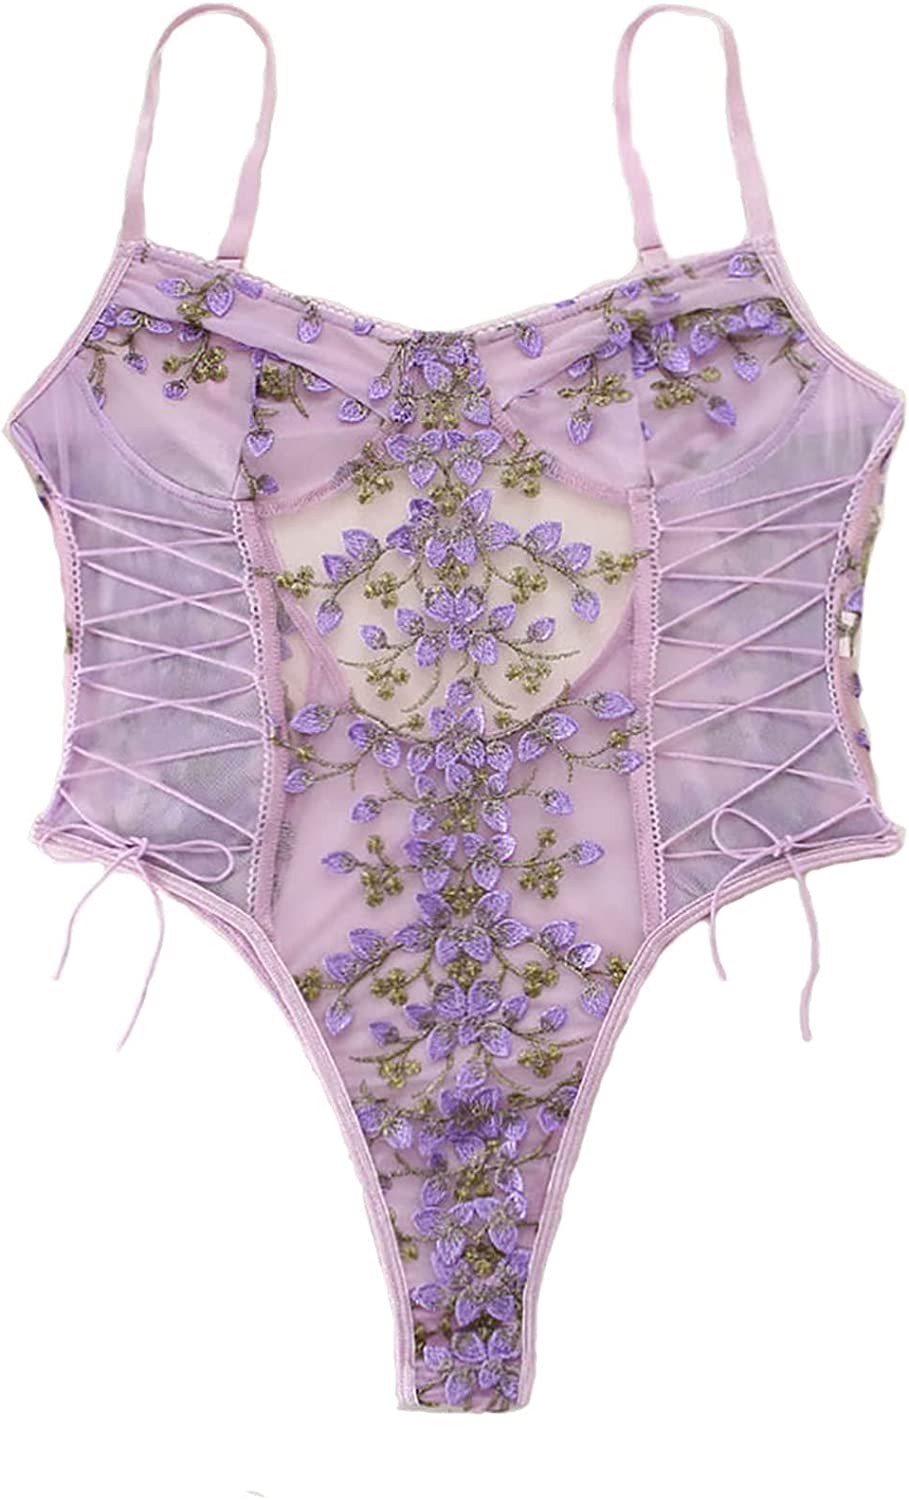  Sexy Bodysuit Tops for Women Floral Embroidery Bustier